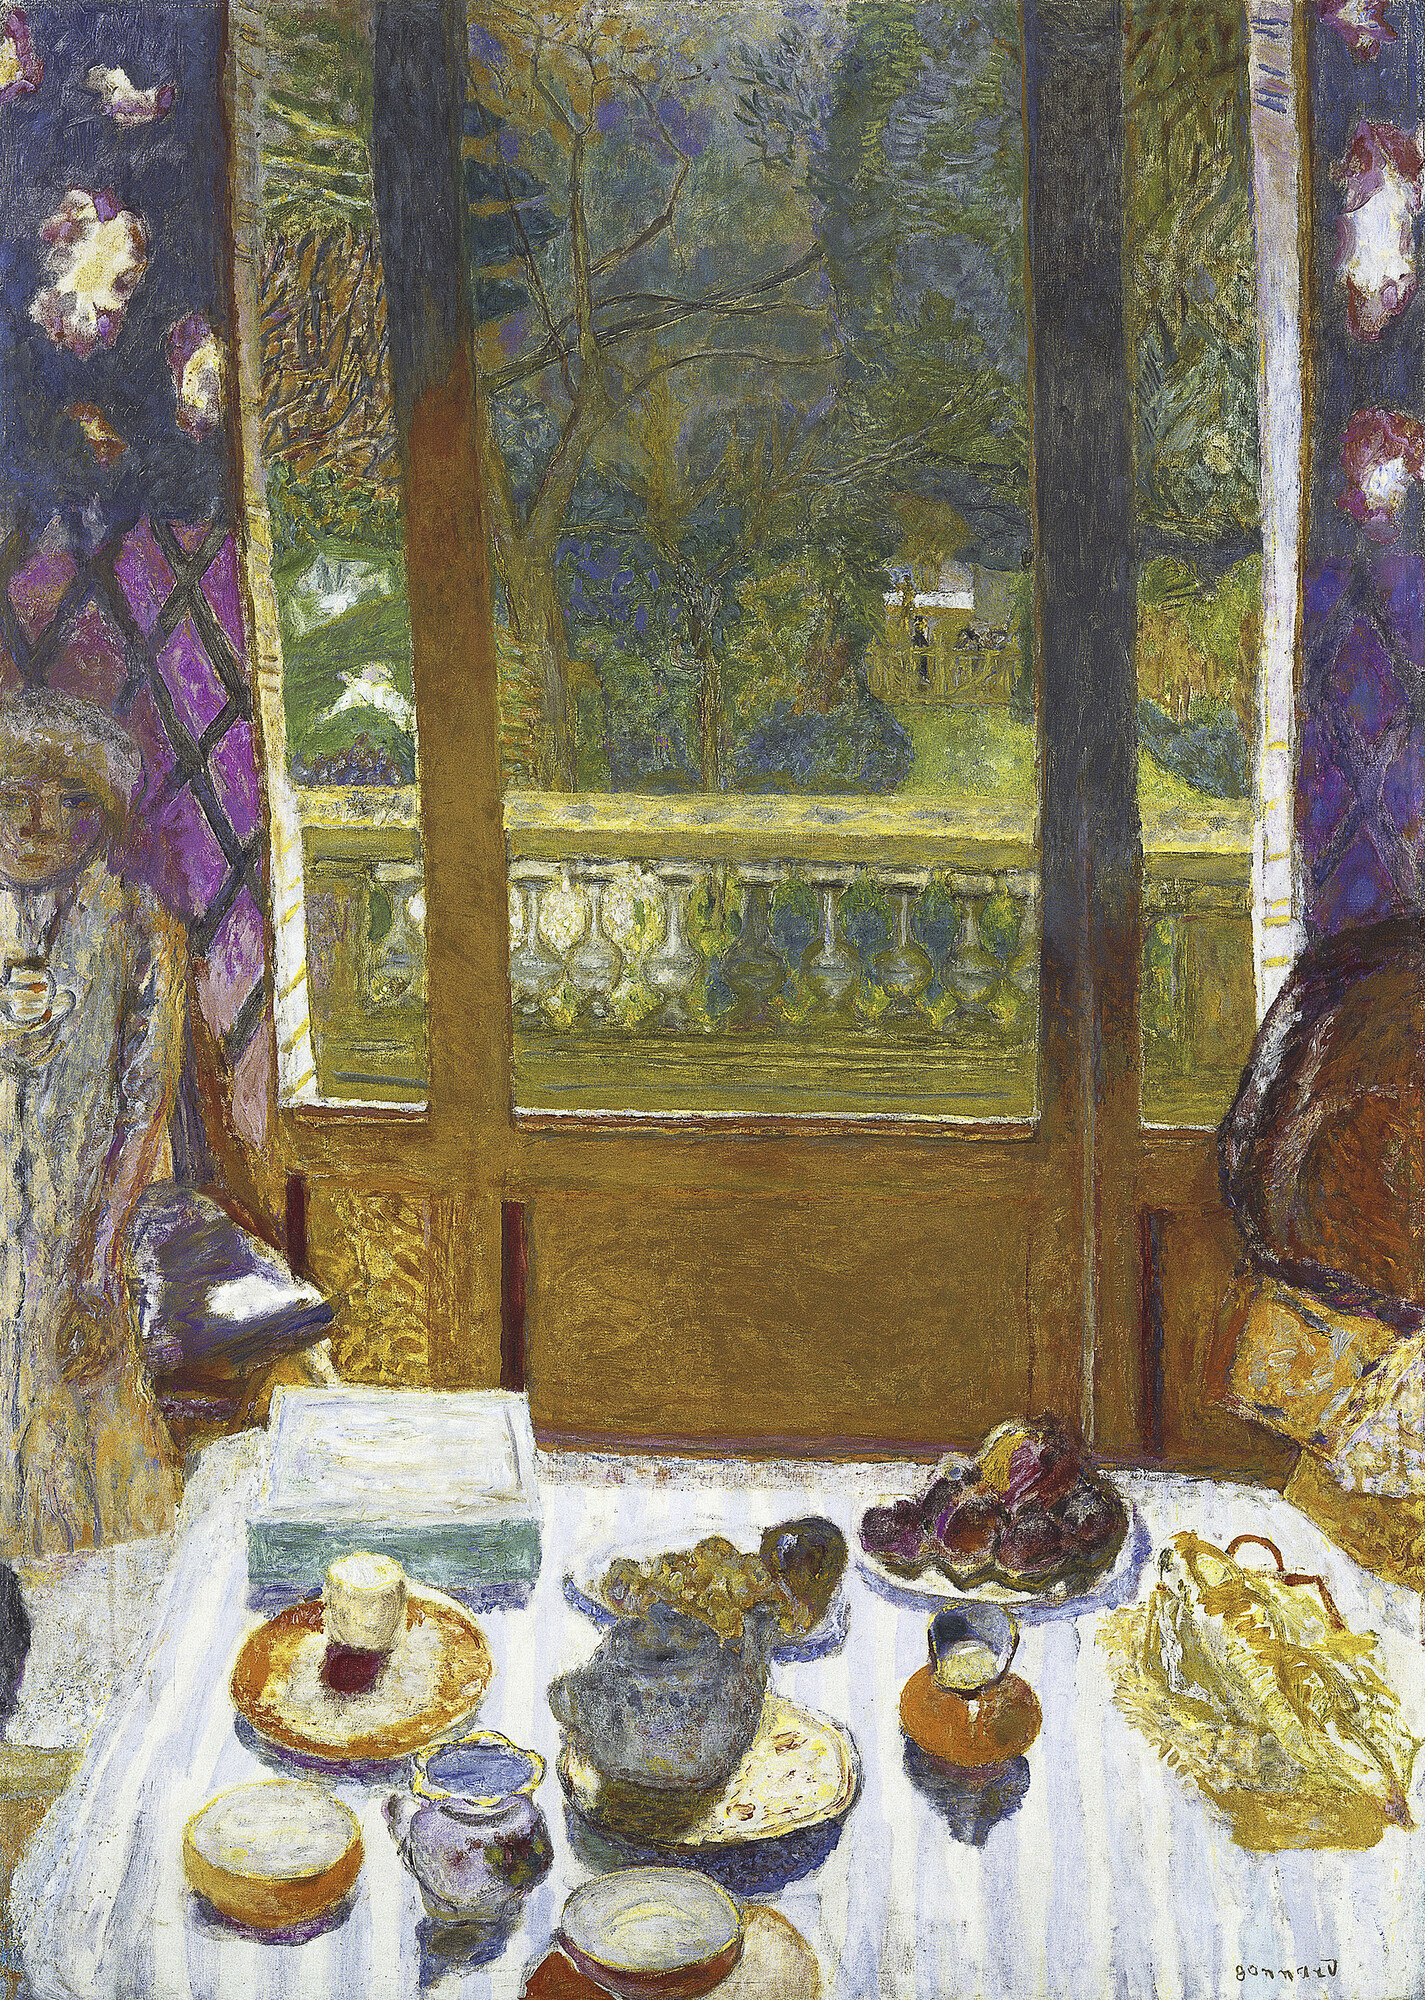 Pierre Bonnard, <em>Dining room overlooking the garden (The breakfast room) </em>1930–31, oil on canvas, 159.6 x 113.8 cm. The Museum of Modern Art, New York. Given anonymously, 1941. Digital image © 2023, The Museum of Modern Art, New York / Scala, Florence.